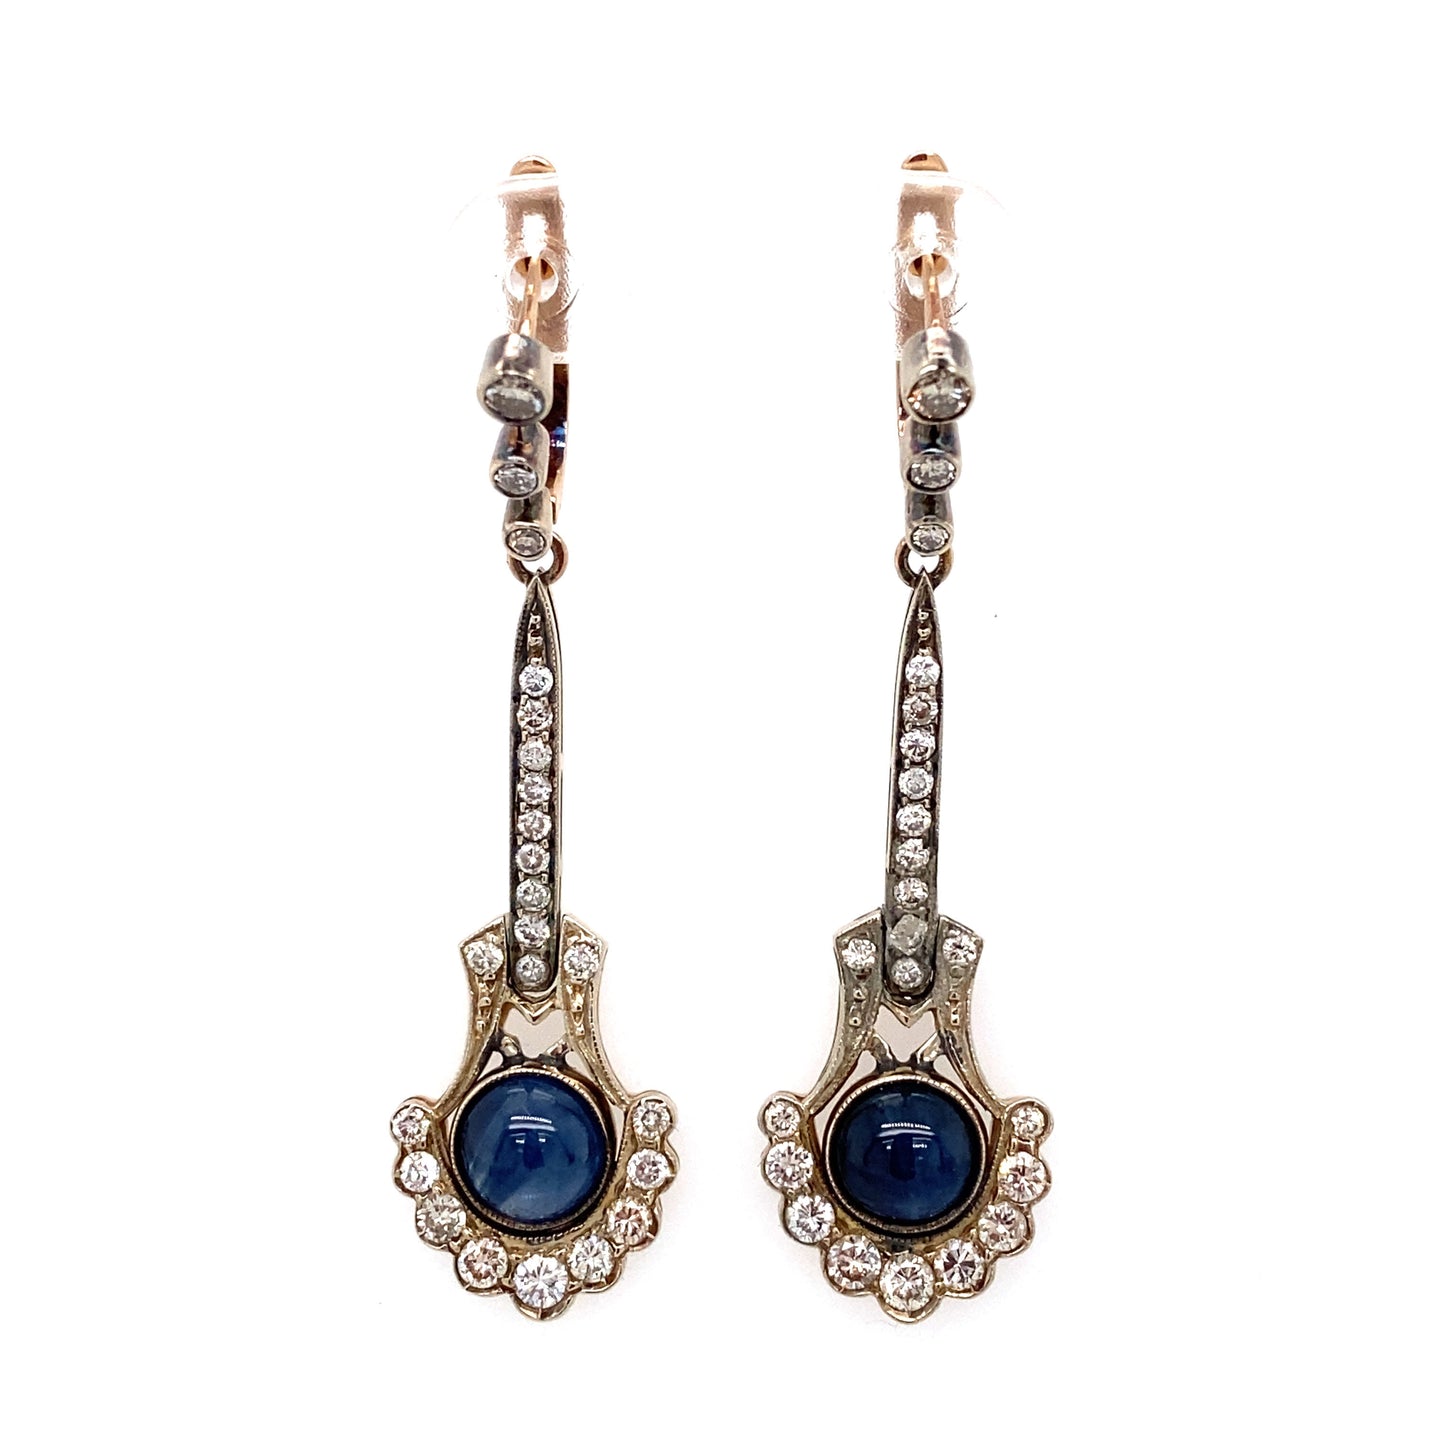 Circa 1940s Art Deco Style Cabochon Sapphire and Diamond Earrings in 14K White Gold, Made in Ukraine